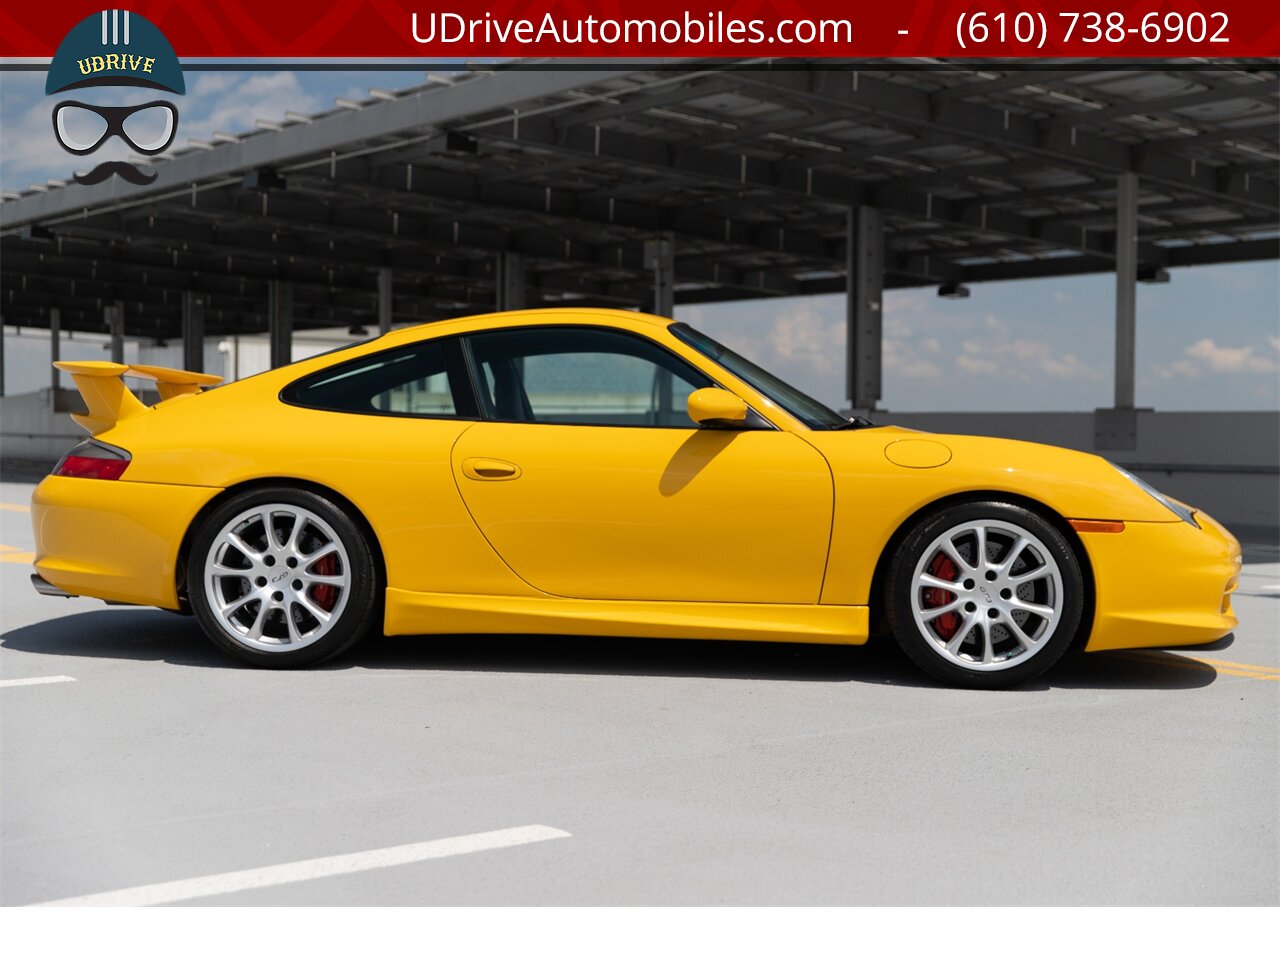 2004 Porsche 911 GT3 14k Miles 2 Owners Sport Seats Service History  Same Owner for 15 Years - Photo 15 - West Chester, PA 19382